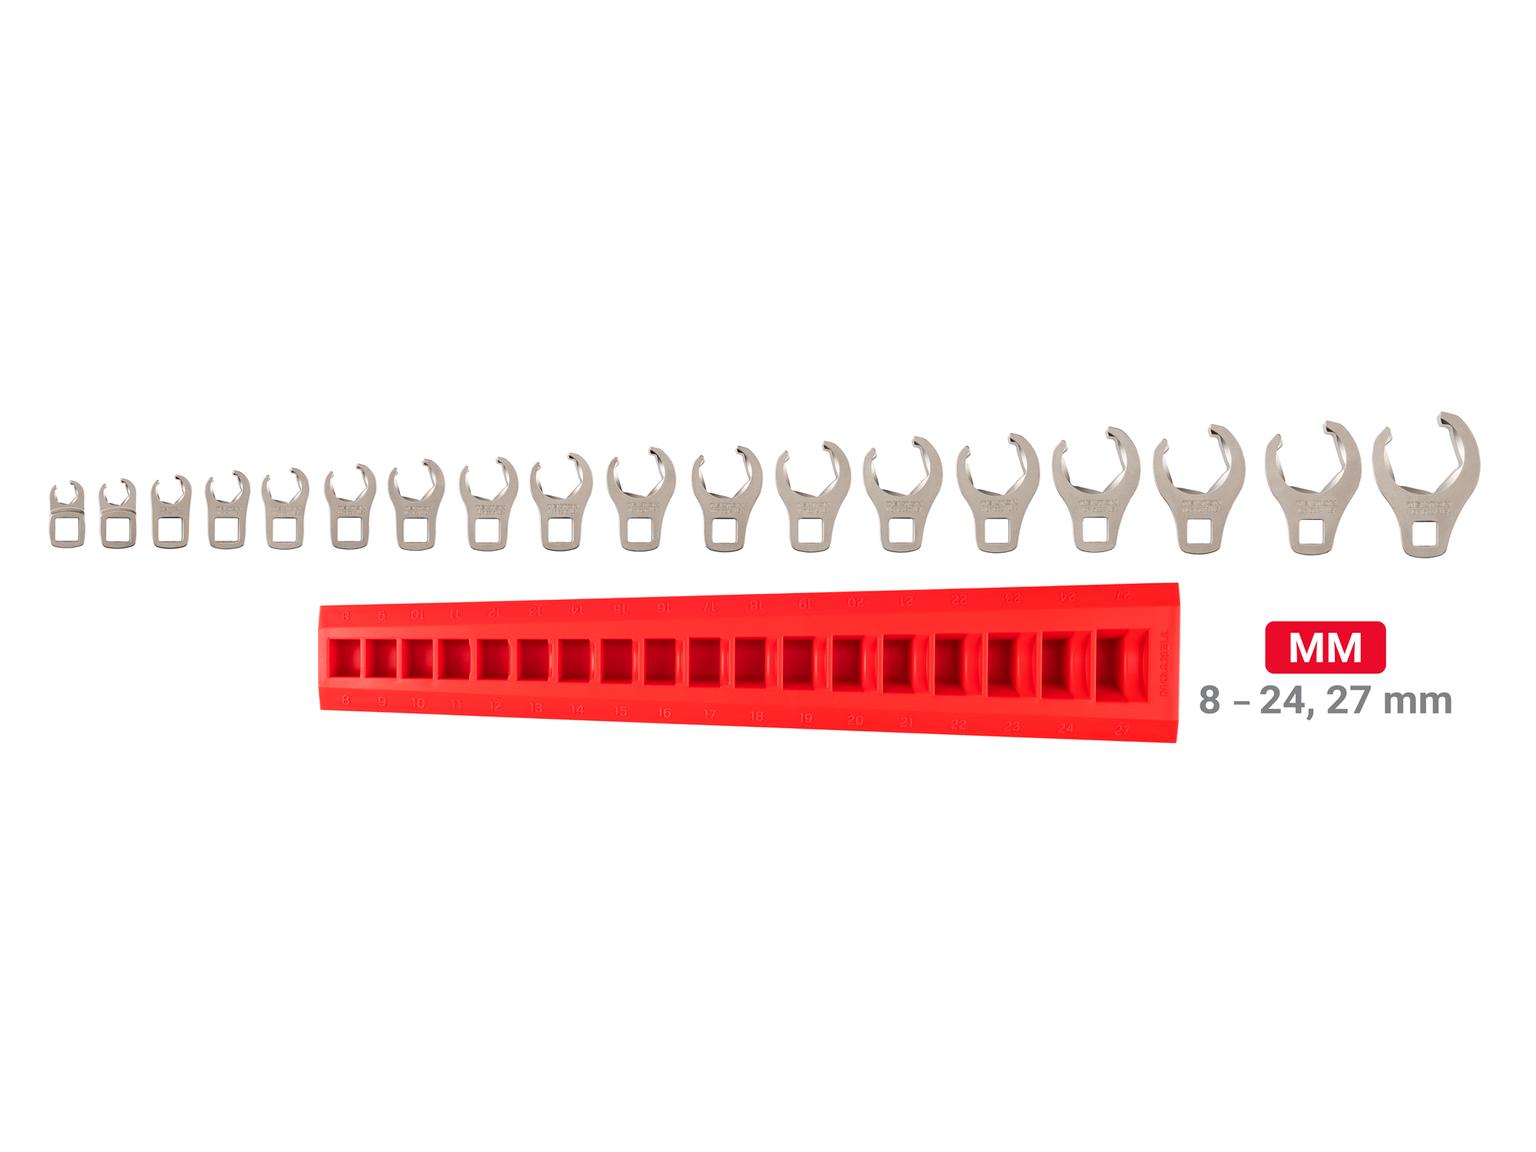 TEKTON WCF92220-T 3/8 Inch Drive 6-Point Flare Nut Crowfoot Wrench Set with Rack, 18-Piece (8-27 mm)